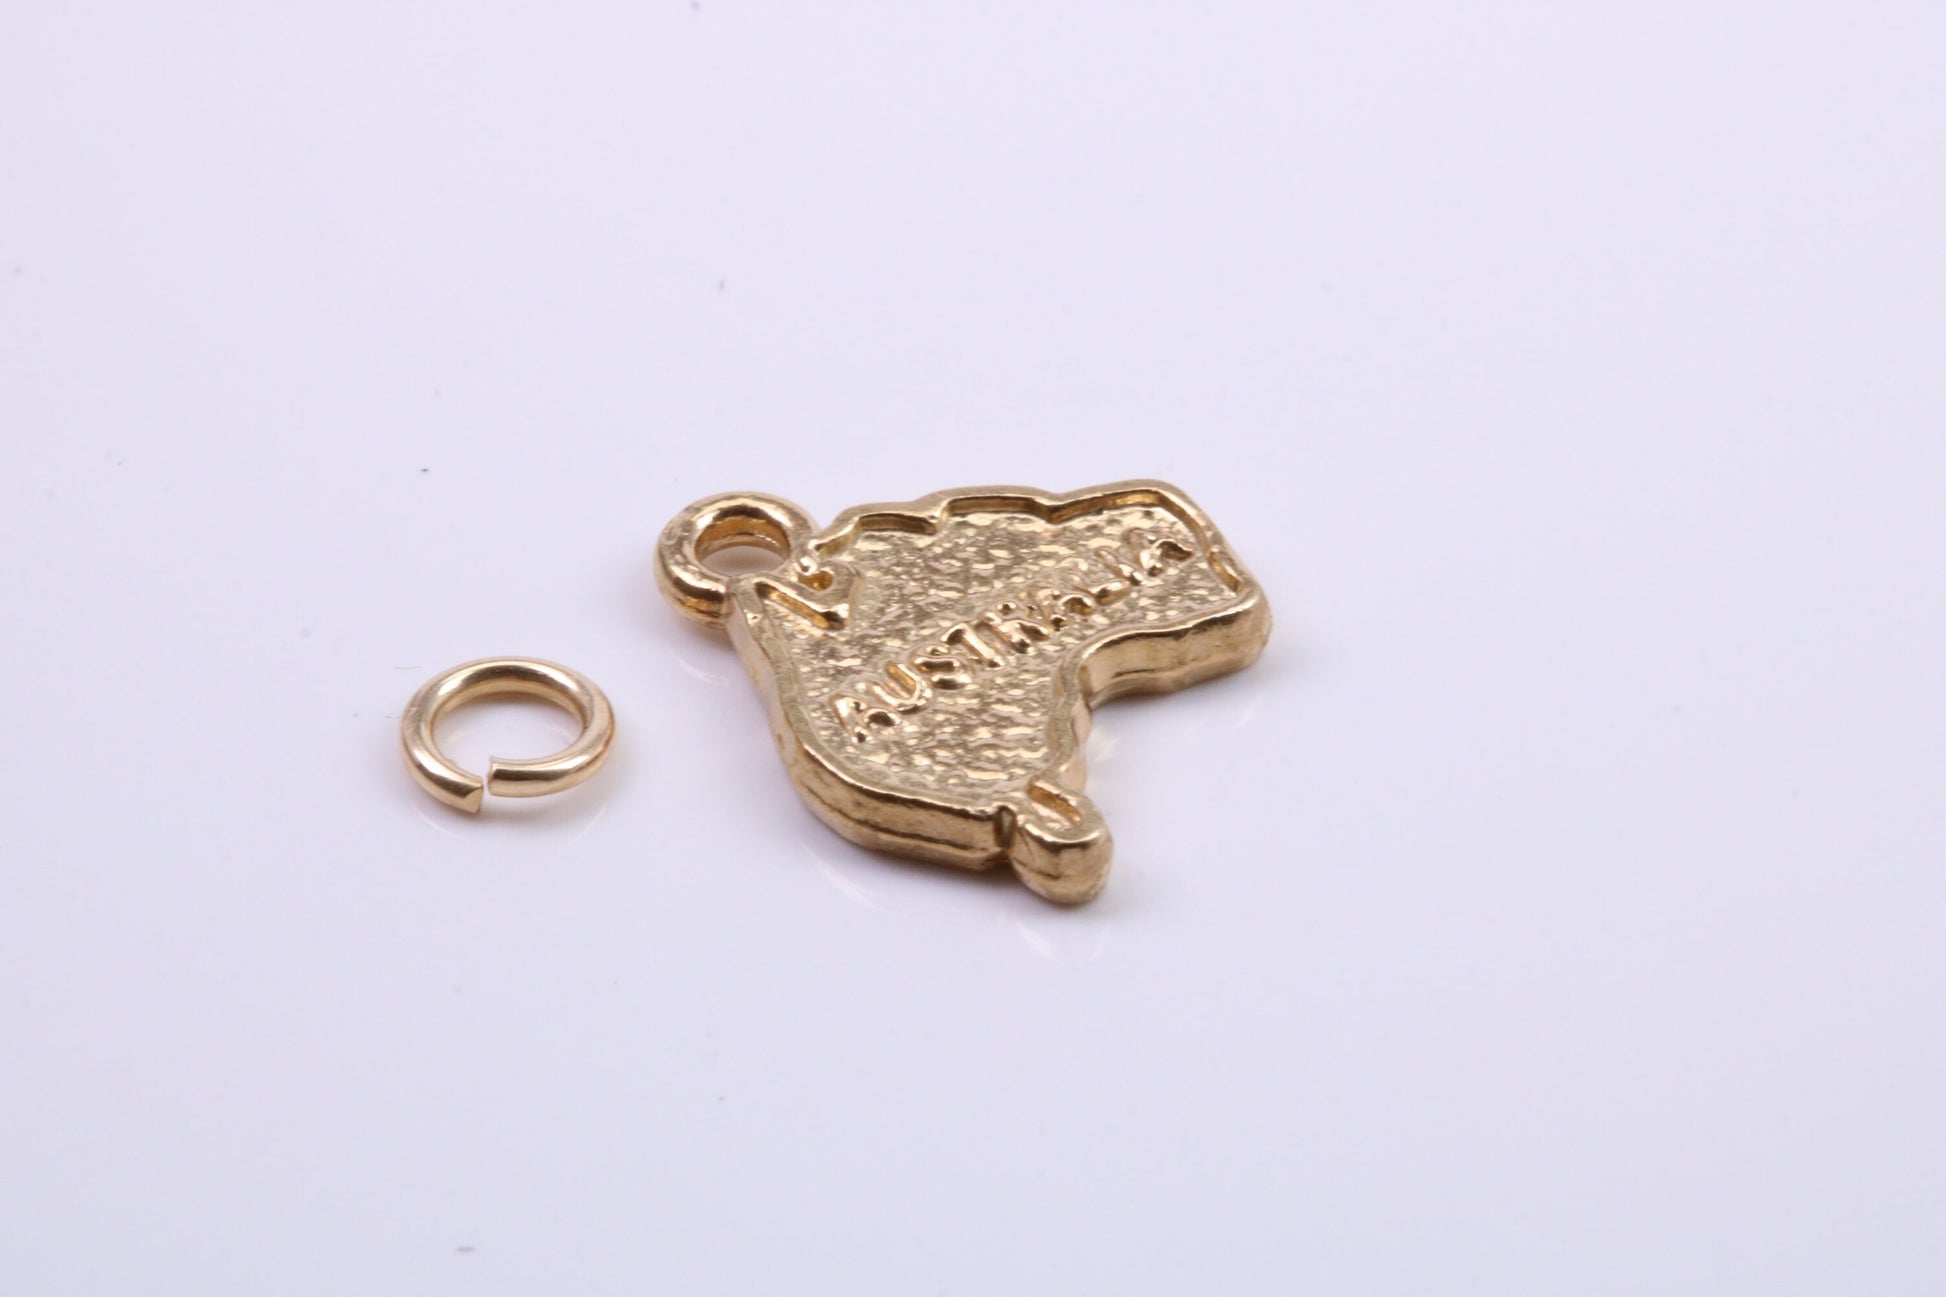 Australia Charm, Traditional Charm, Made from Solid 9ct Yellow Gold, British Hallmarked, Complete with Attachment Link